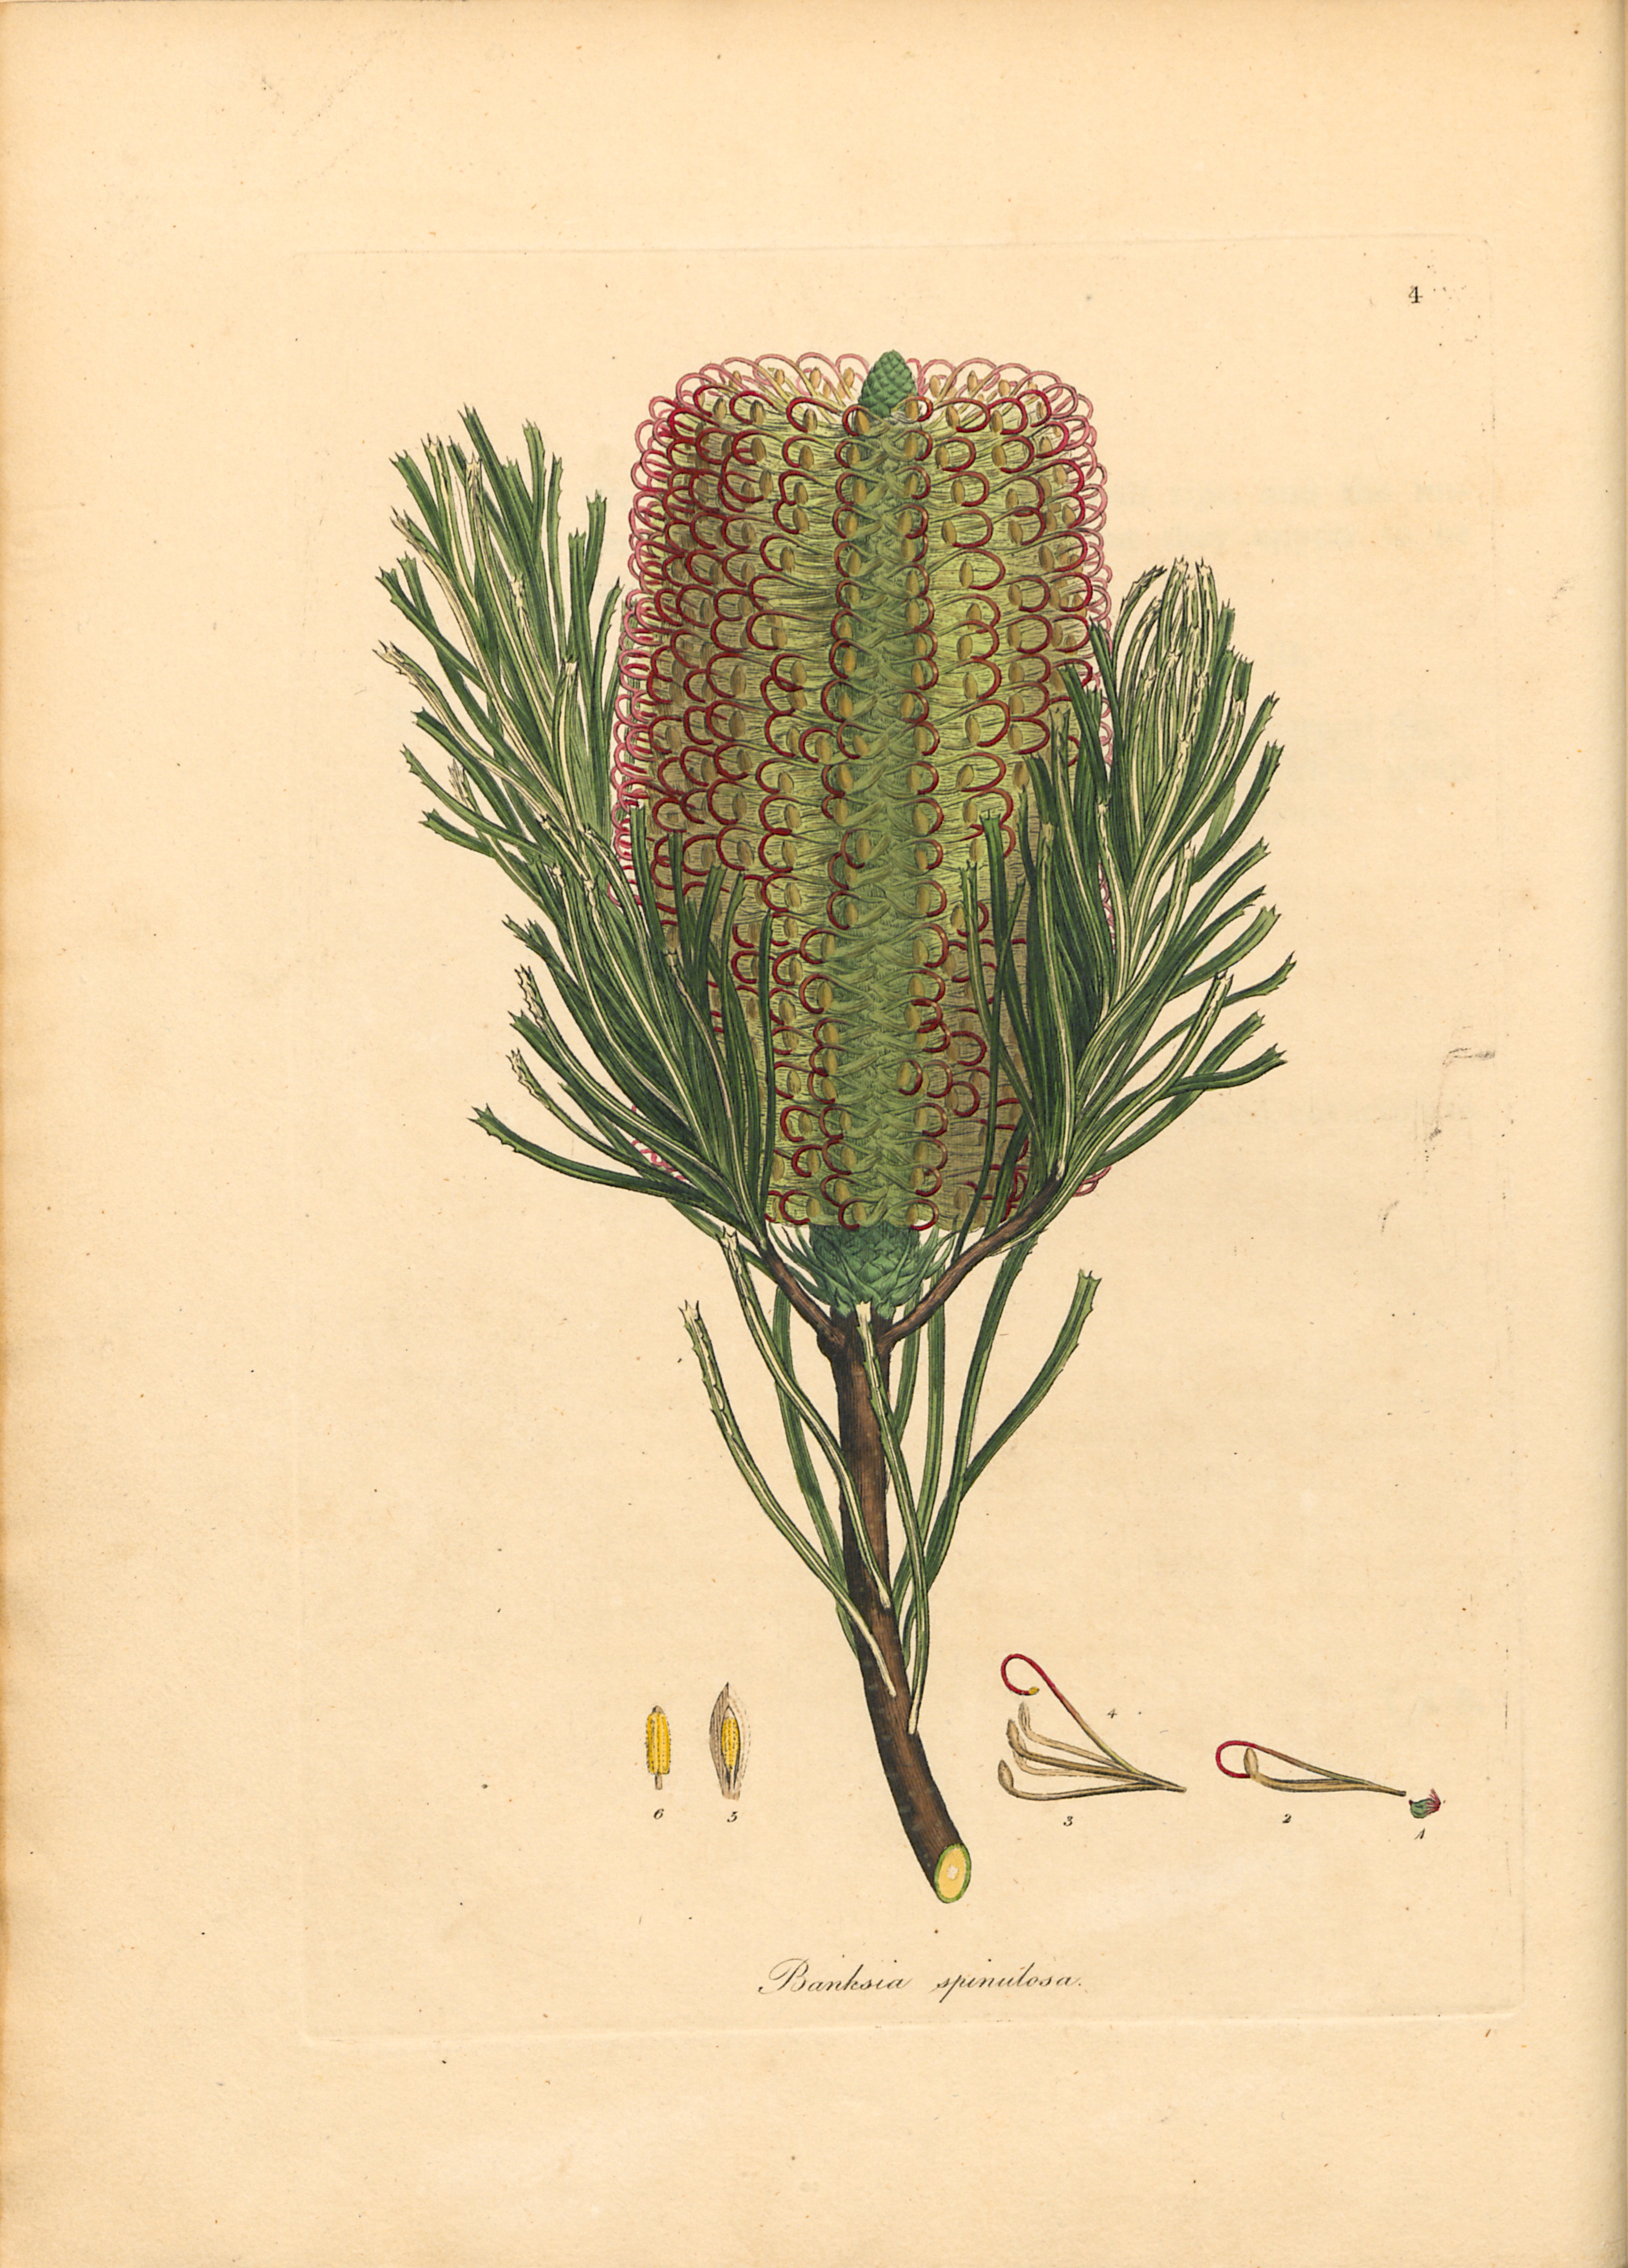 Banksia spinulosa 1793 A specimen of the botany of New Holland, Australian Library of Art, State Library of Queensland